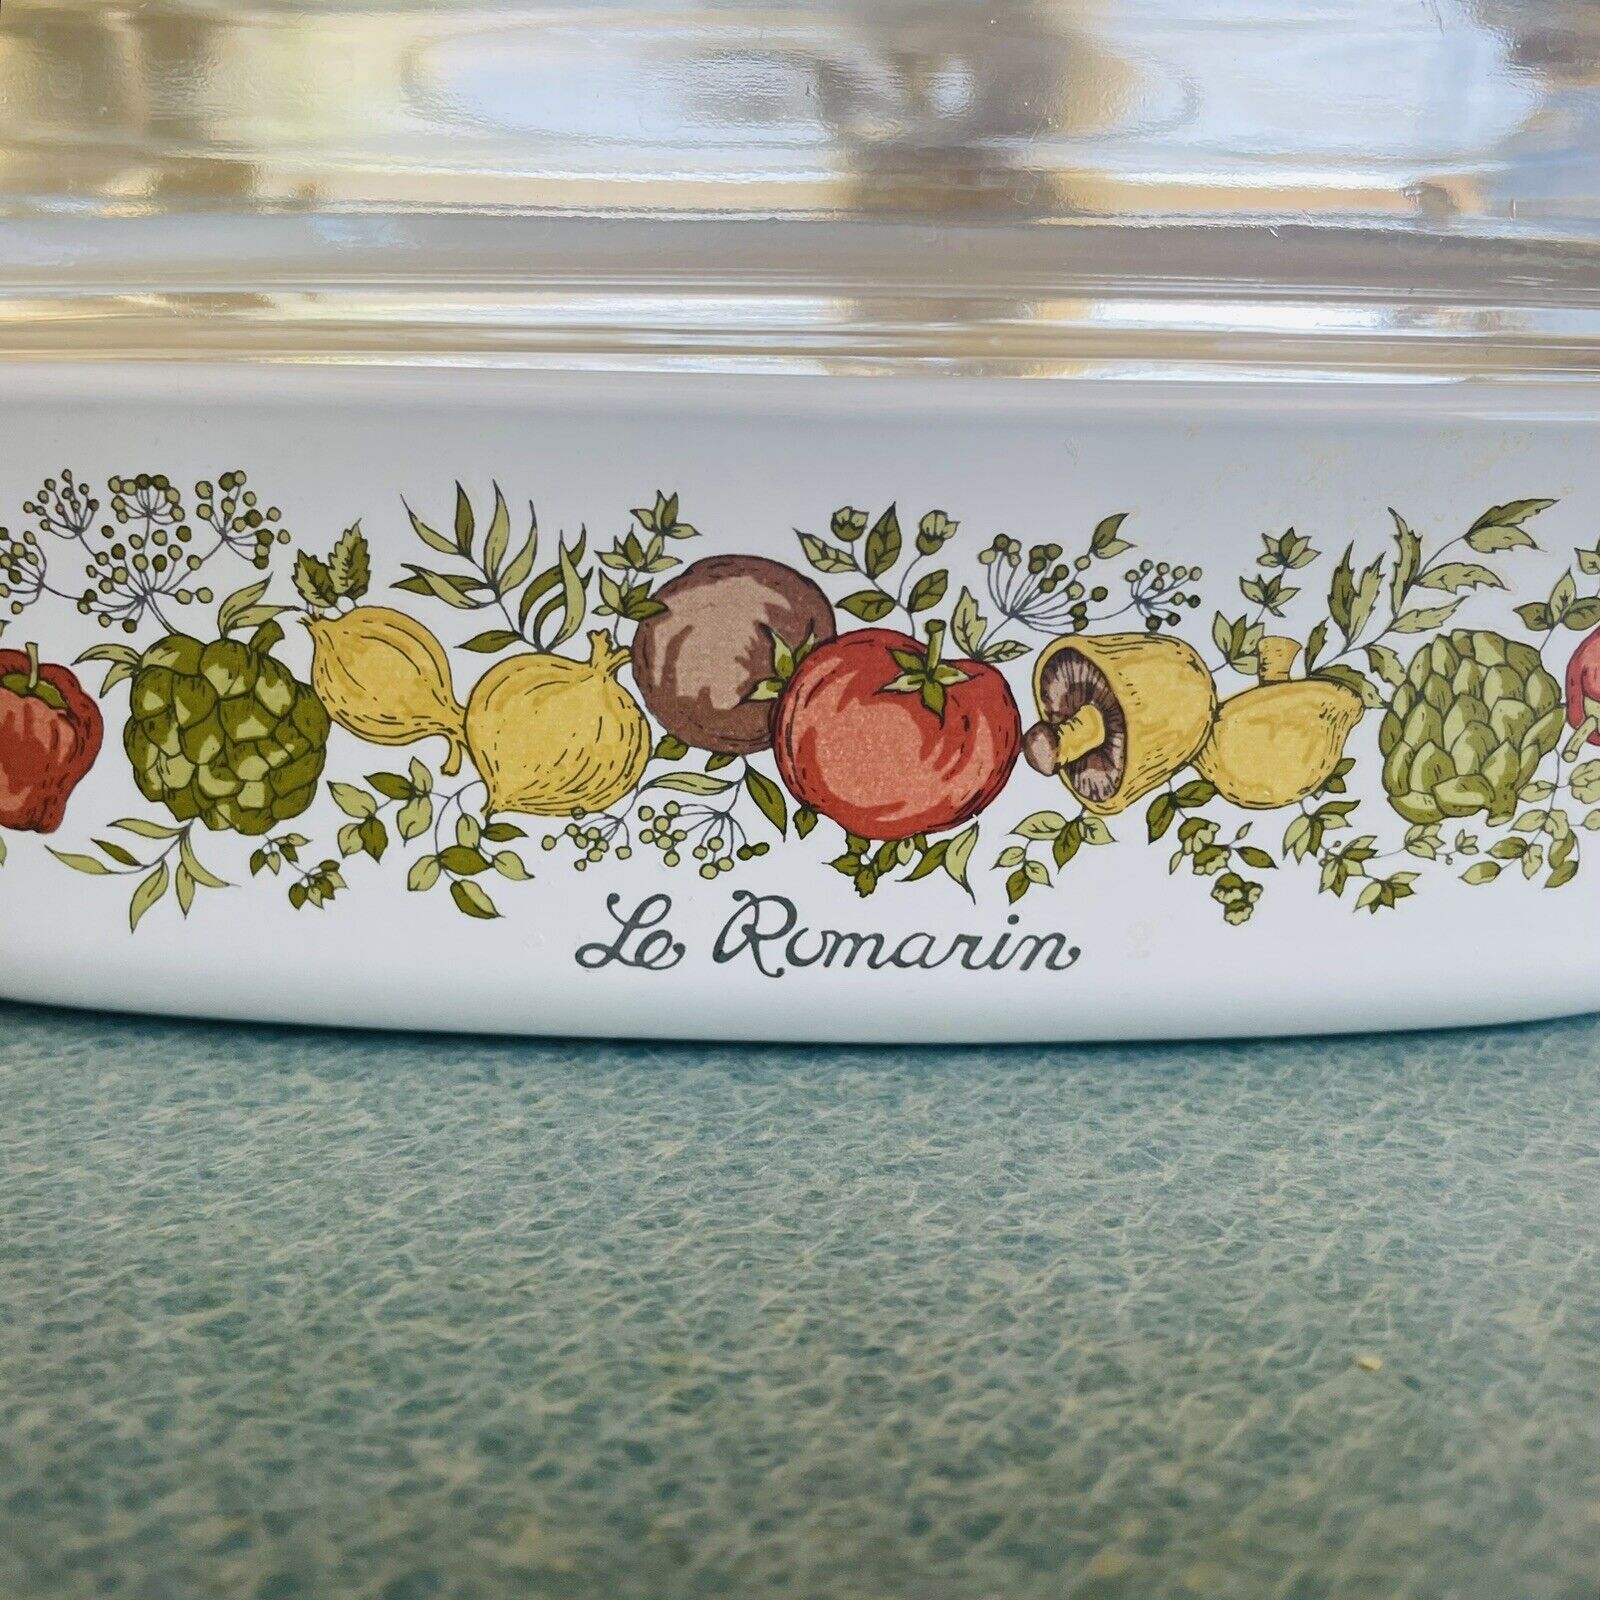 VTG 1970’s Corning Ware A-10-B Spice Of Life Le ROMARIN Casserole Dish Pyrex Lid